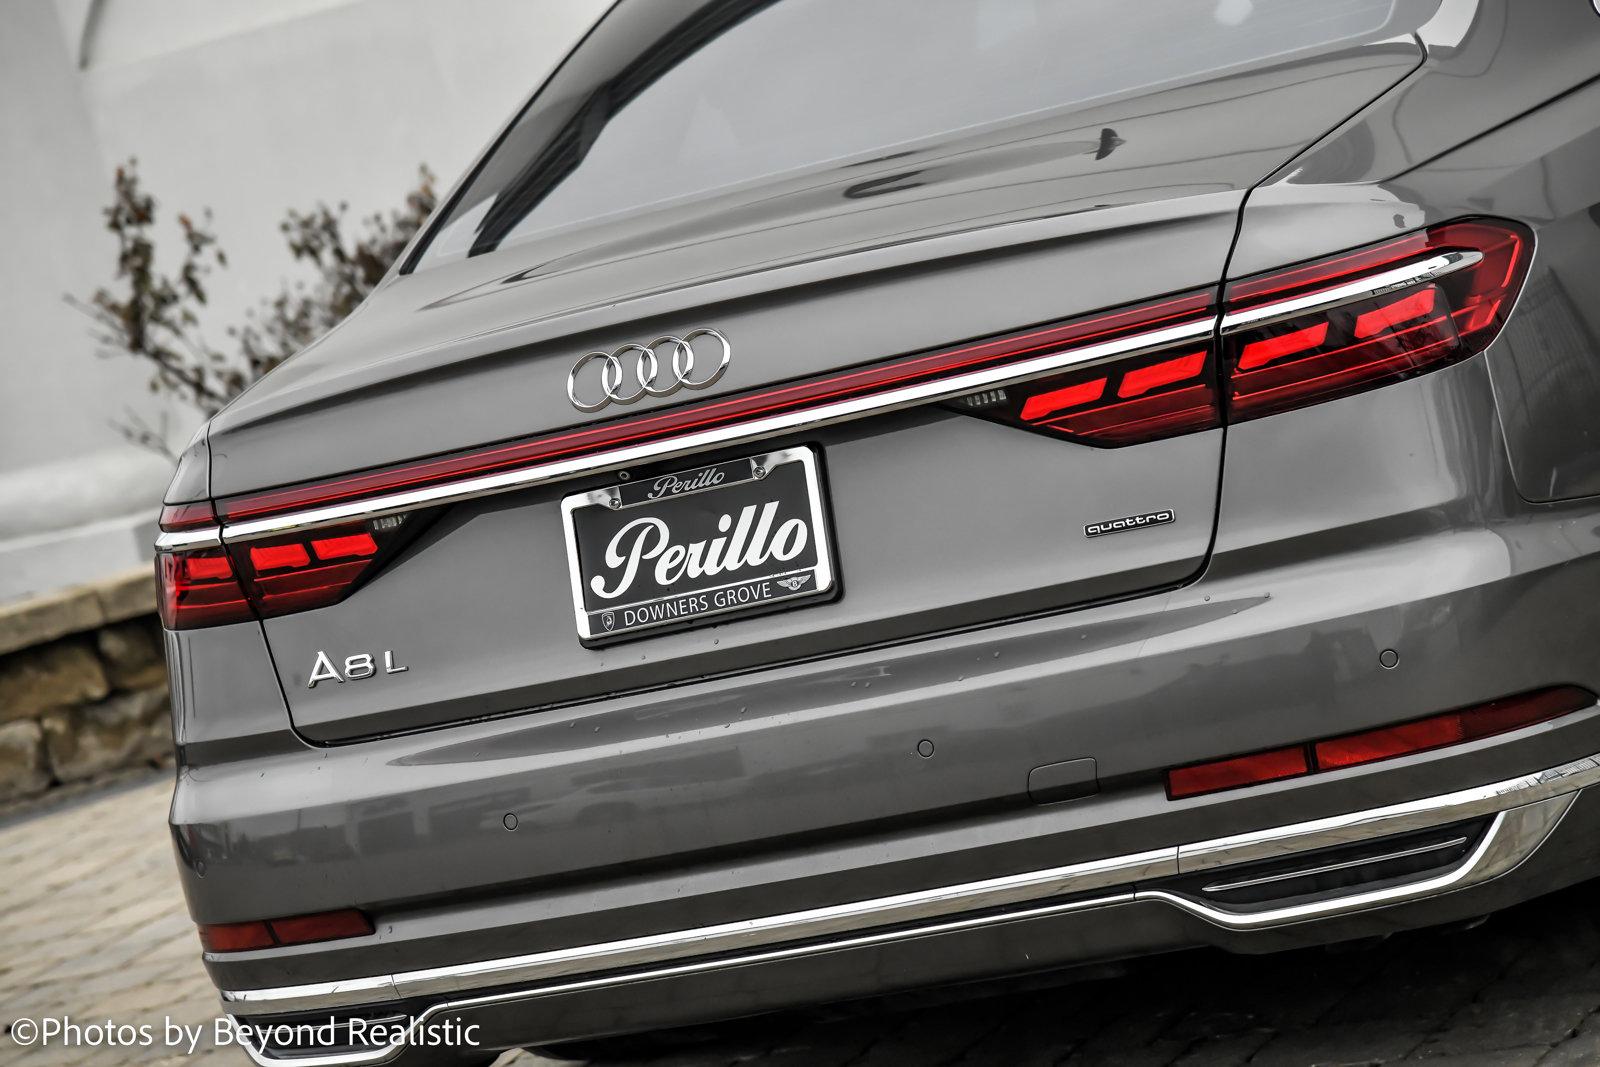 Used 2019 Audi A8 L Executive | Downers Grove, IL